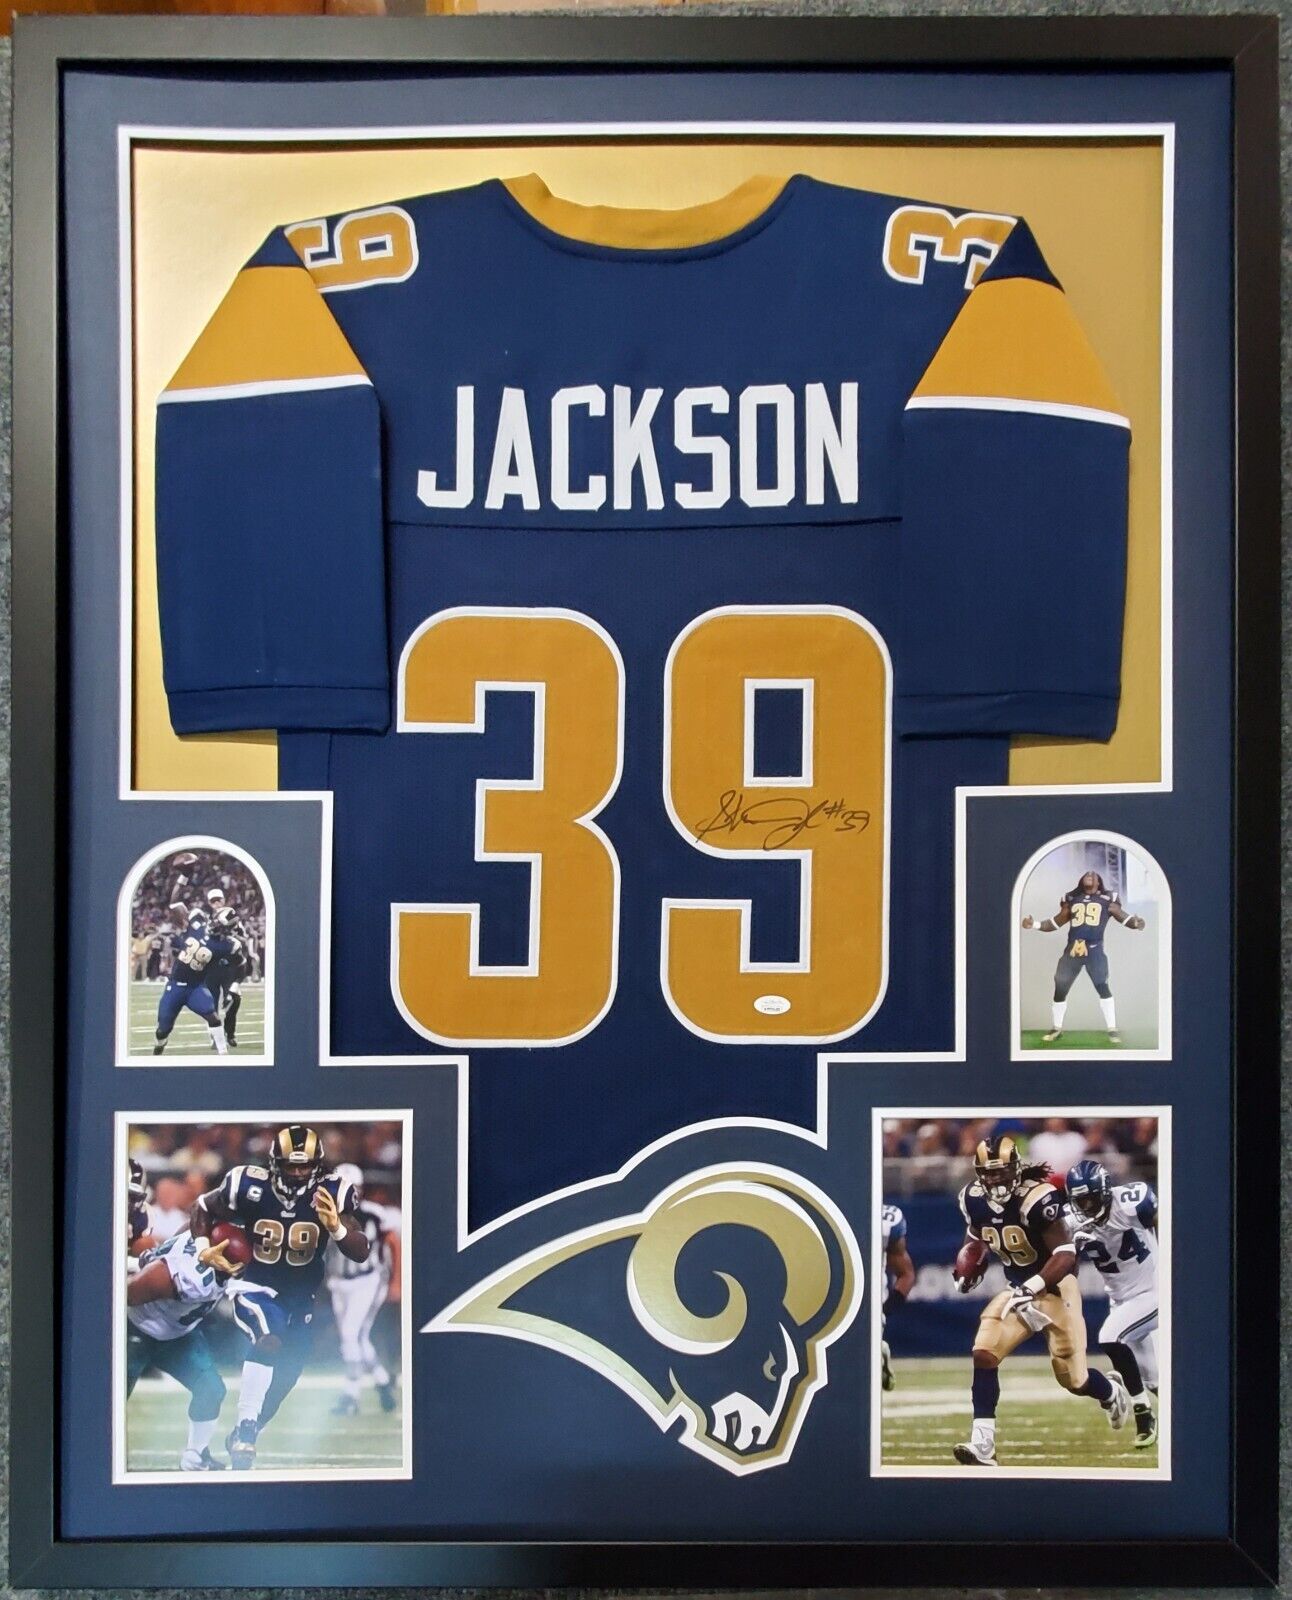 Behind the Jersey Number: Steven Jackson